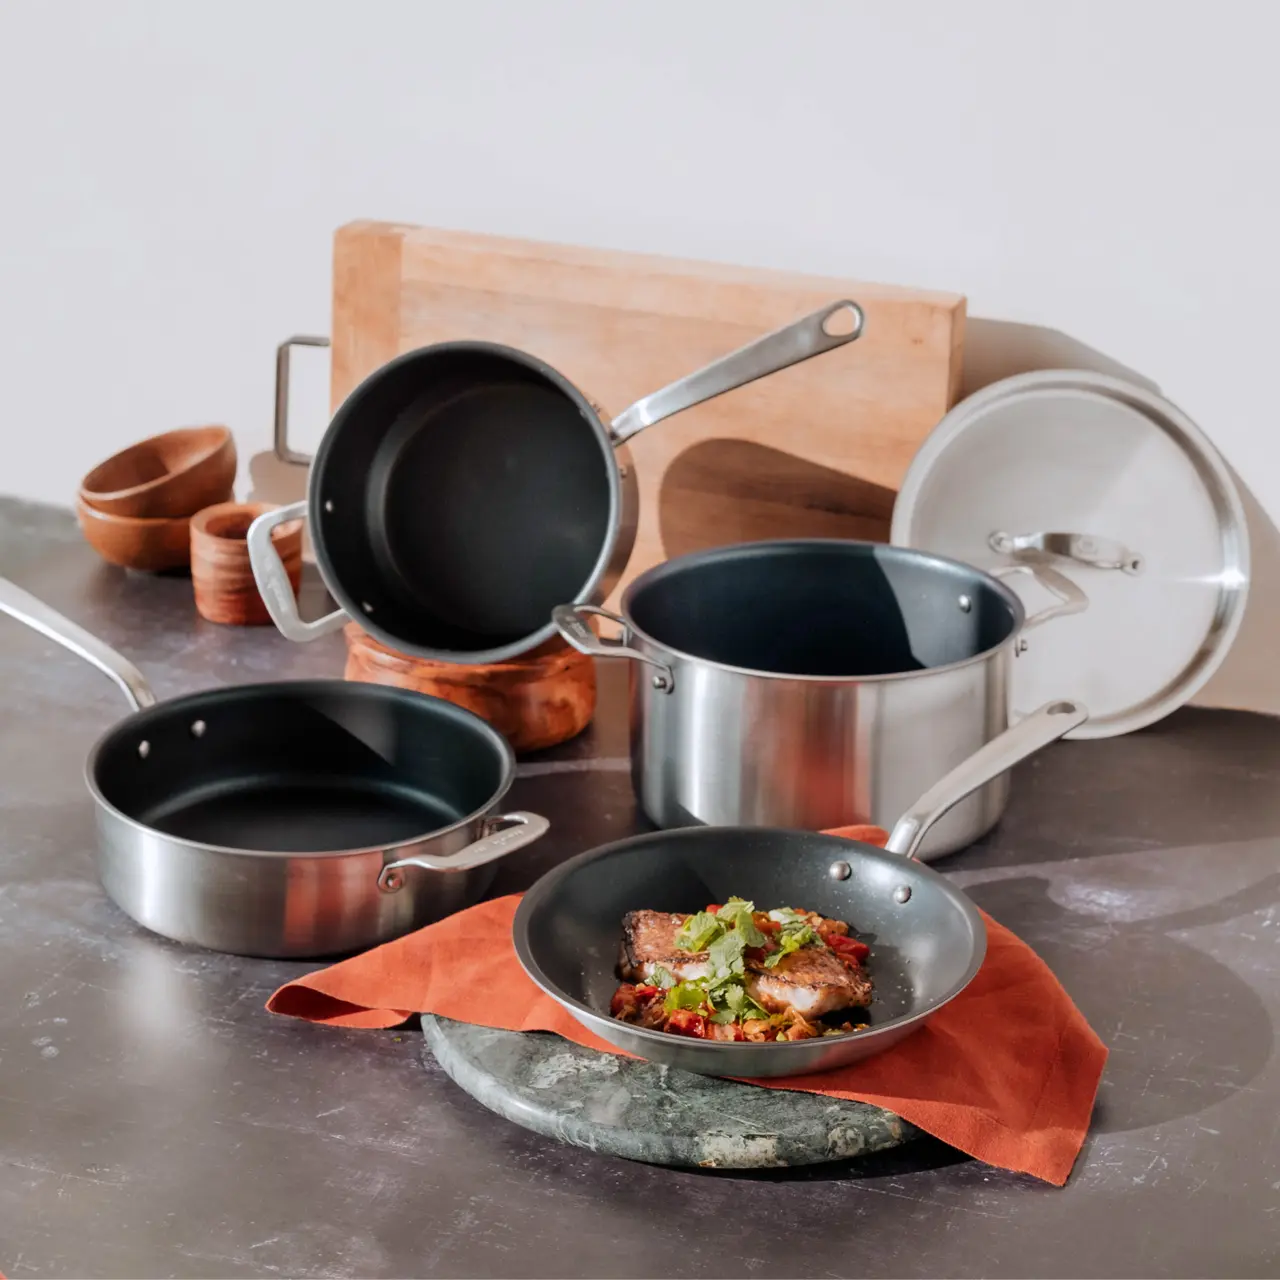 An assortment of cooking pots and pans on a kitchen counter with a dish of food presented in the foreground.